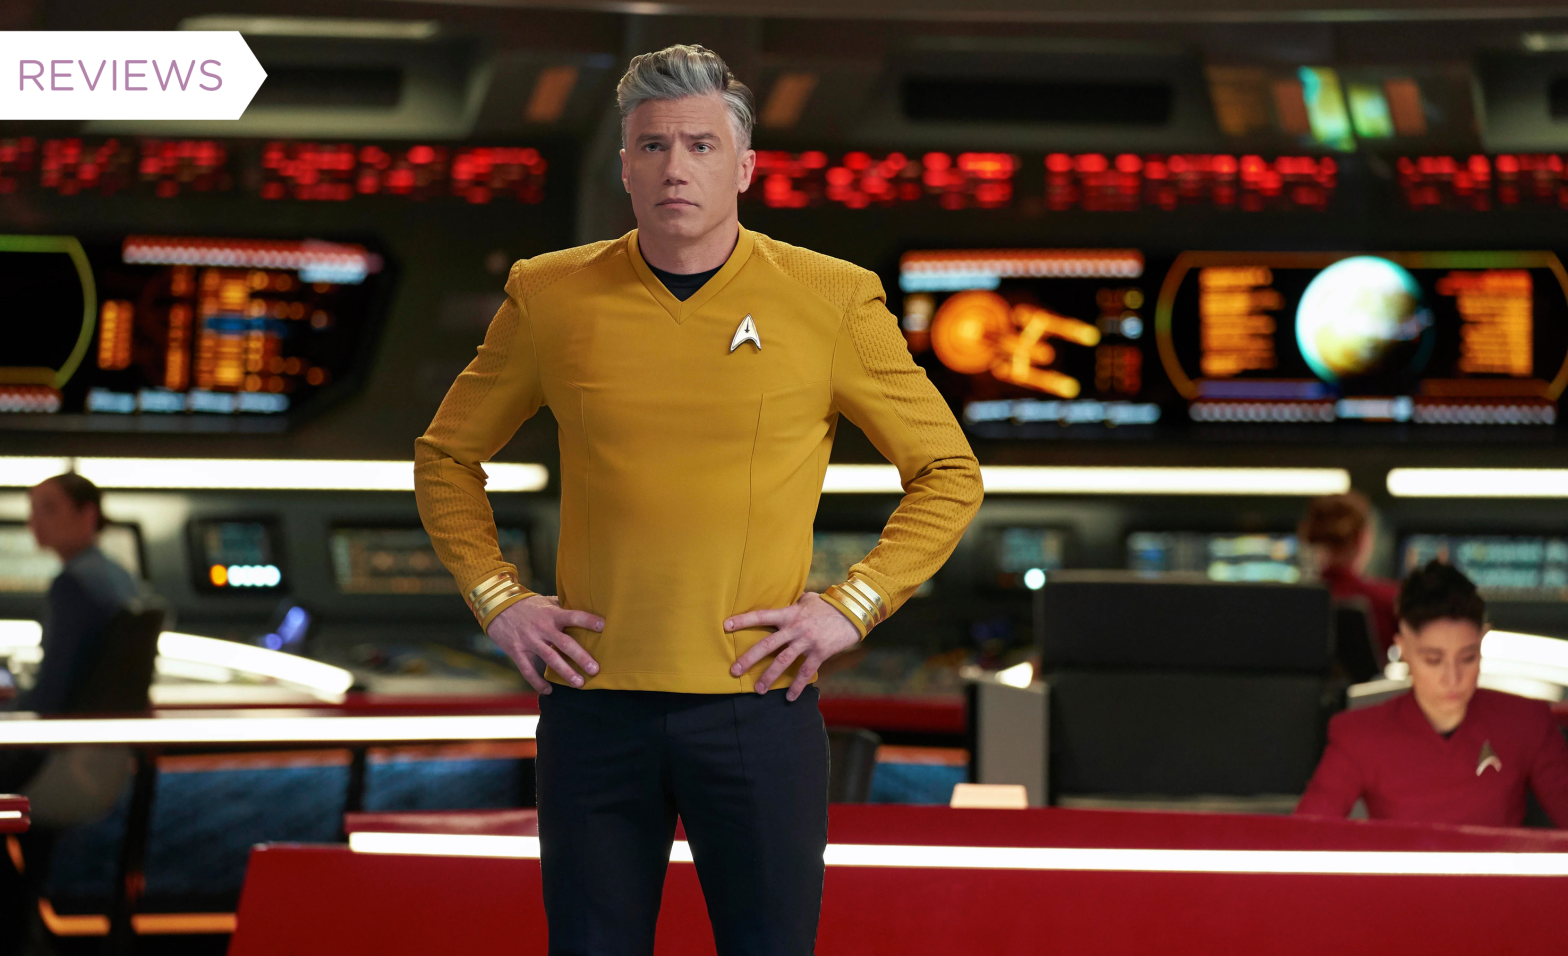 Get ready for some of the funnest boldly going Star Trek's done in a while. (Image: Paramount)